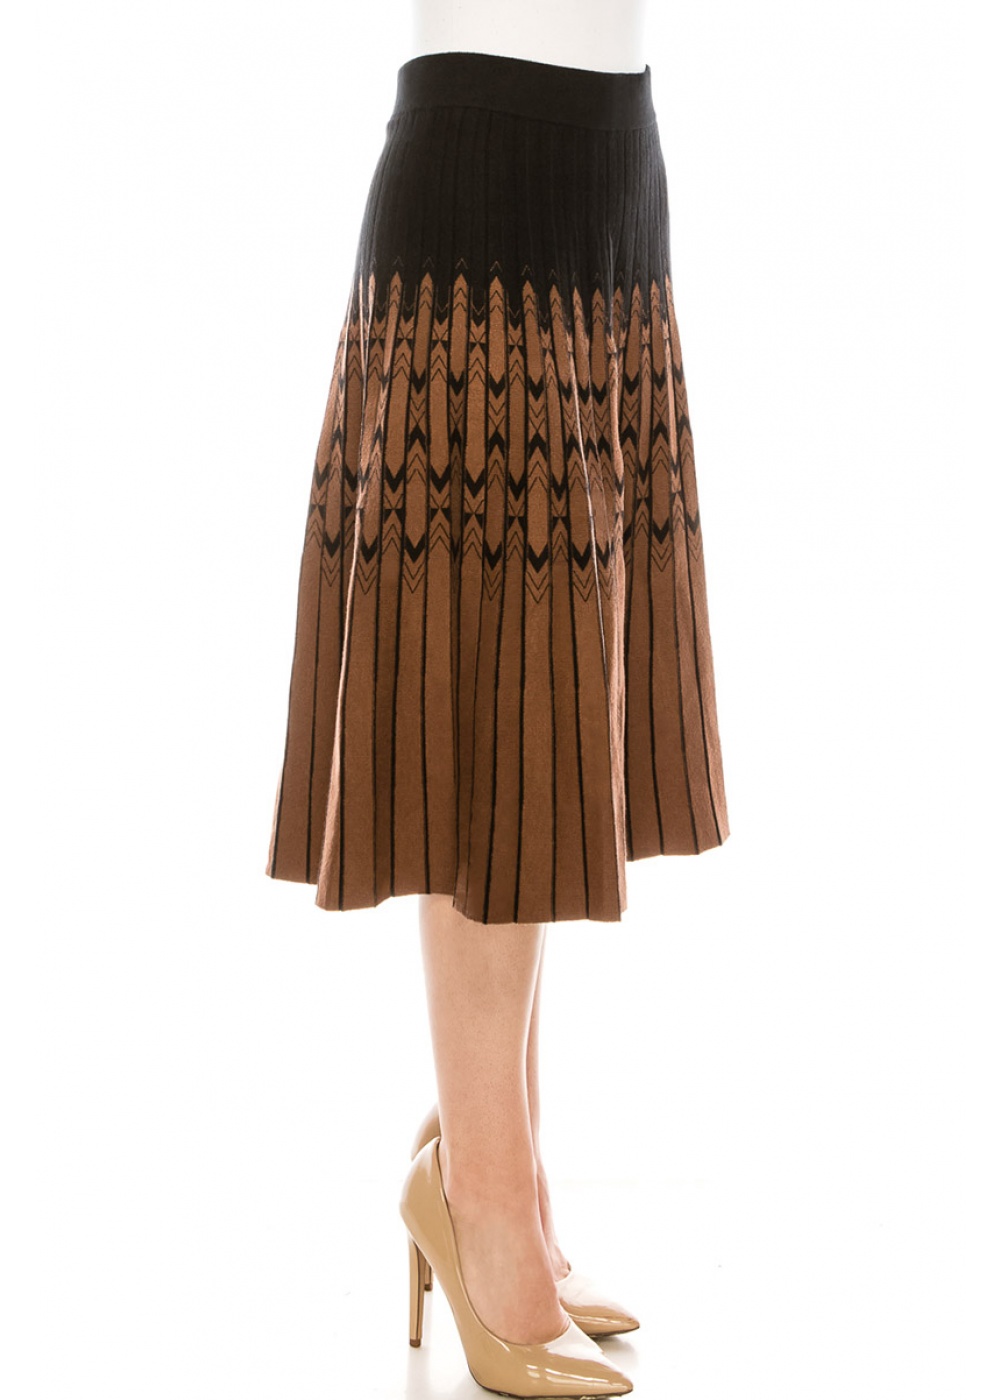 Fair Isle Pleated Skirt in Black and Camel | Modest Women Clothing ...